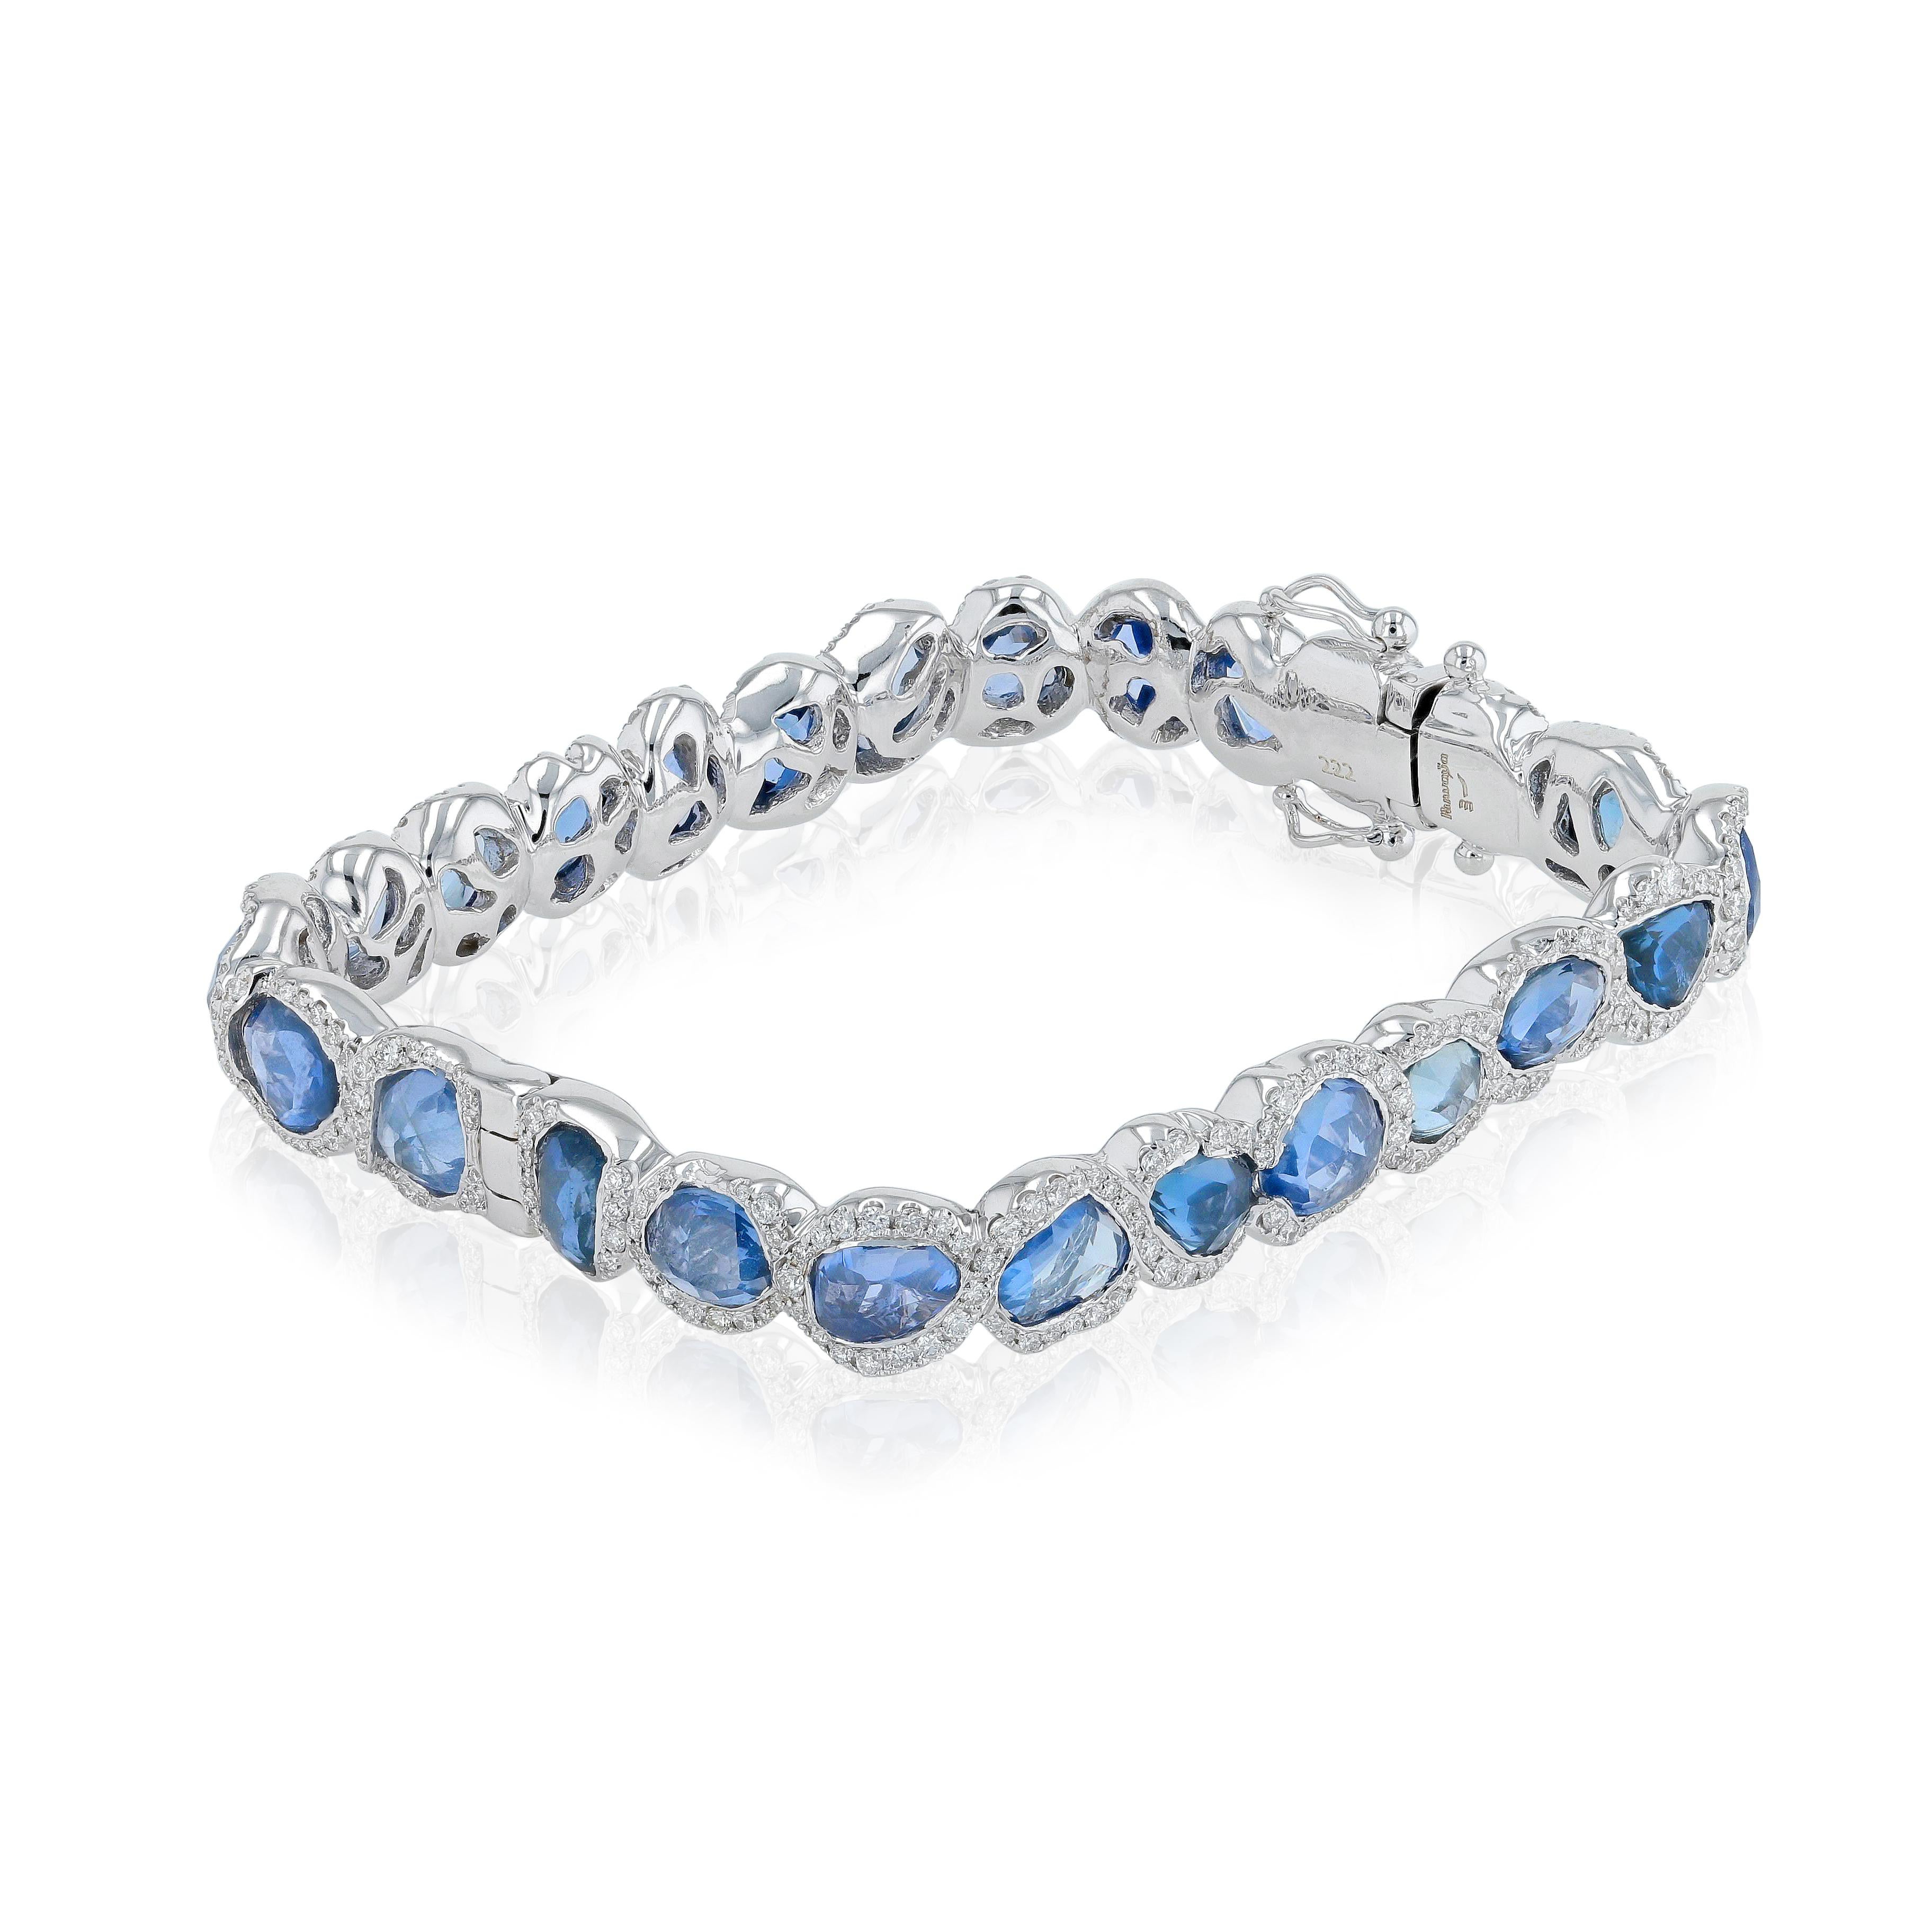 18 Karat White Gold Square Bangle with Blue Sapphires In New Condition For Sale In Abu Dhabi, Abu Dhabi